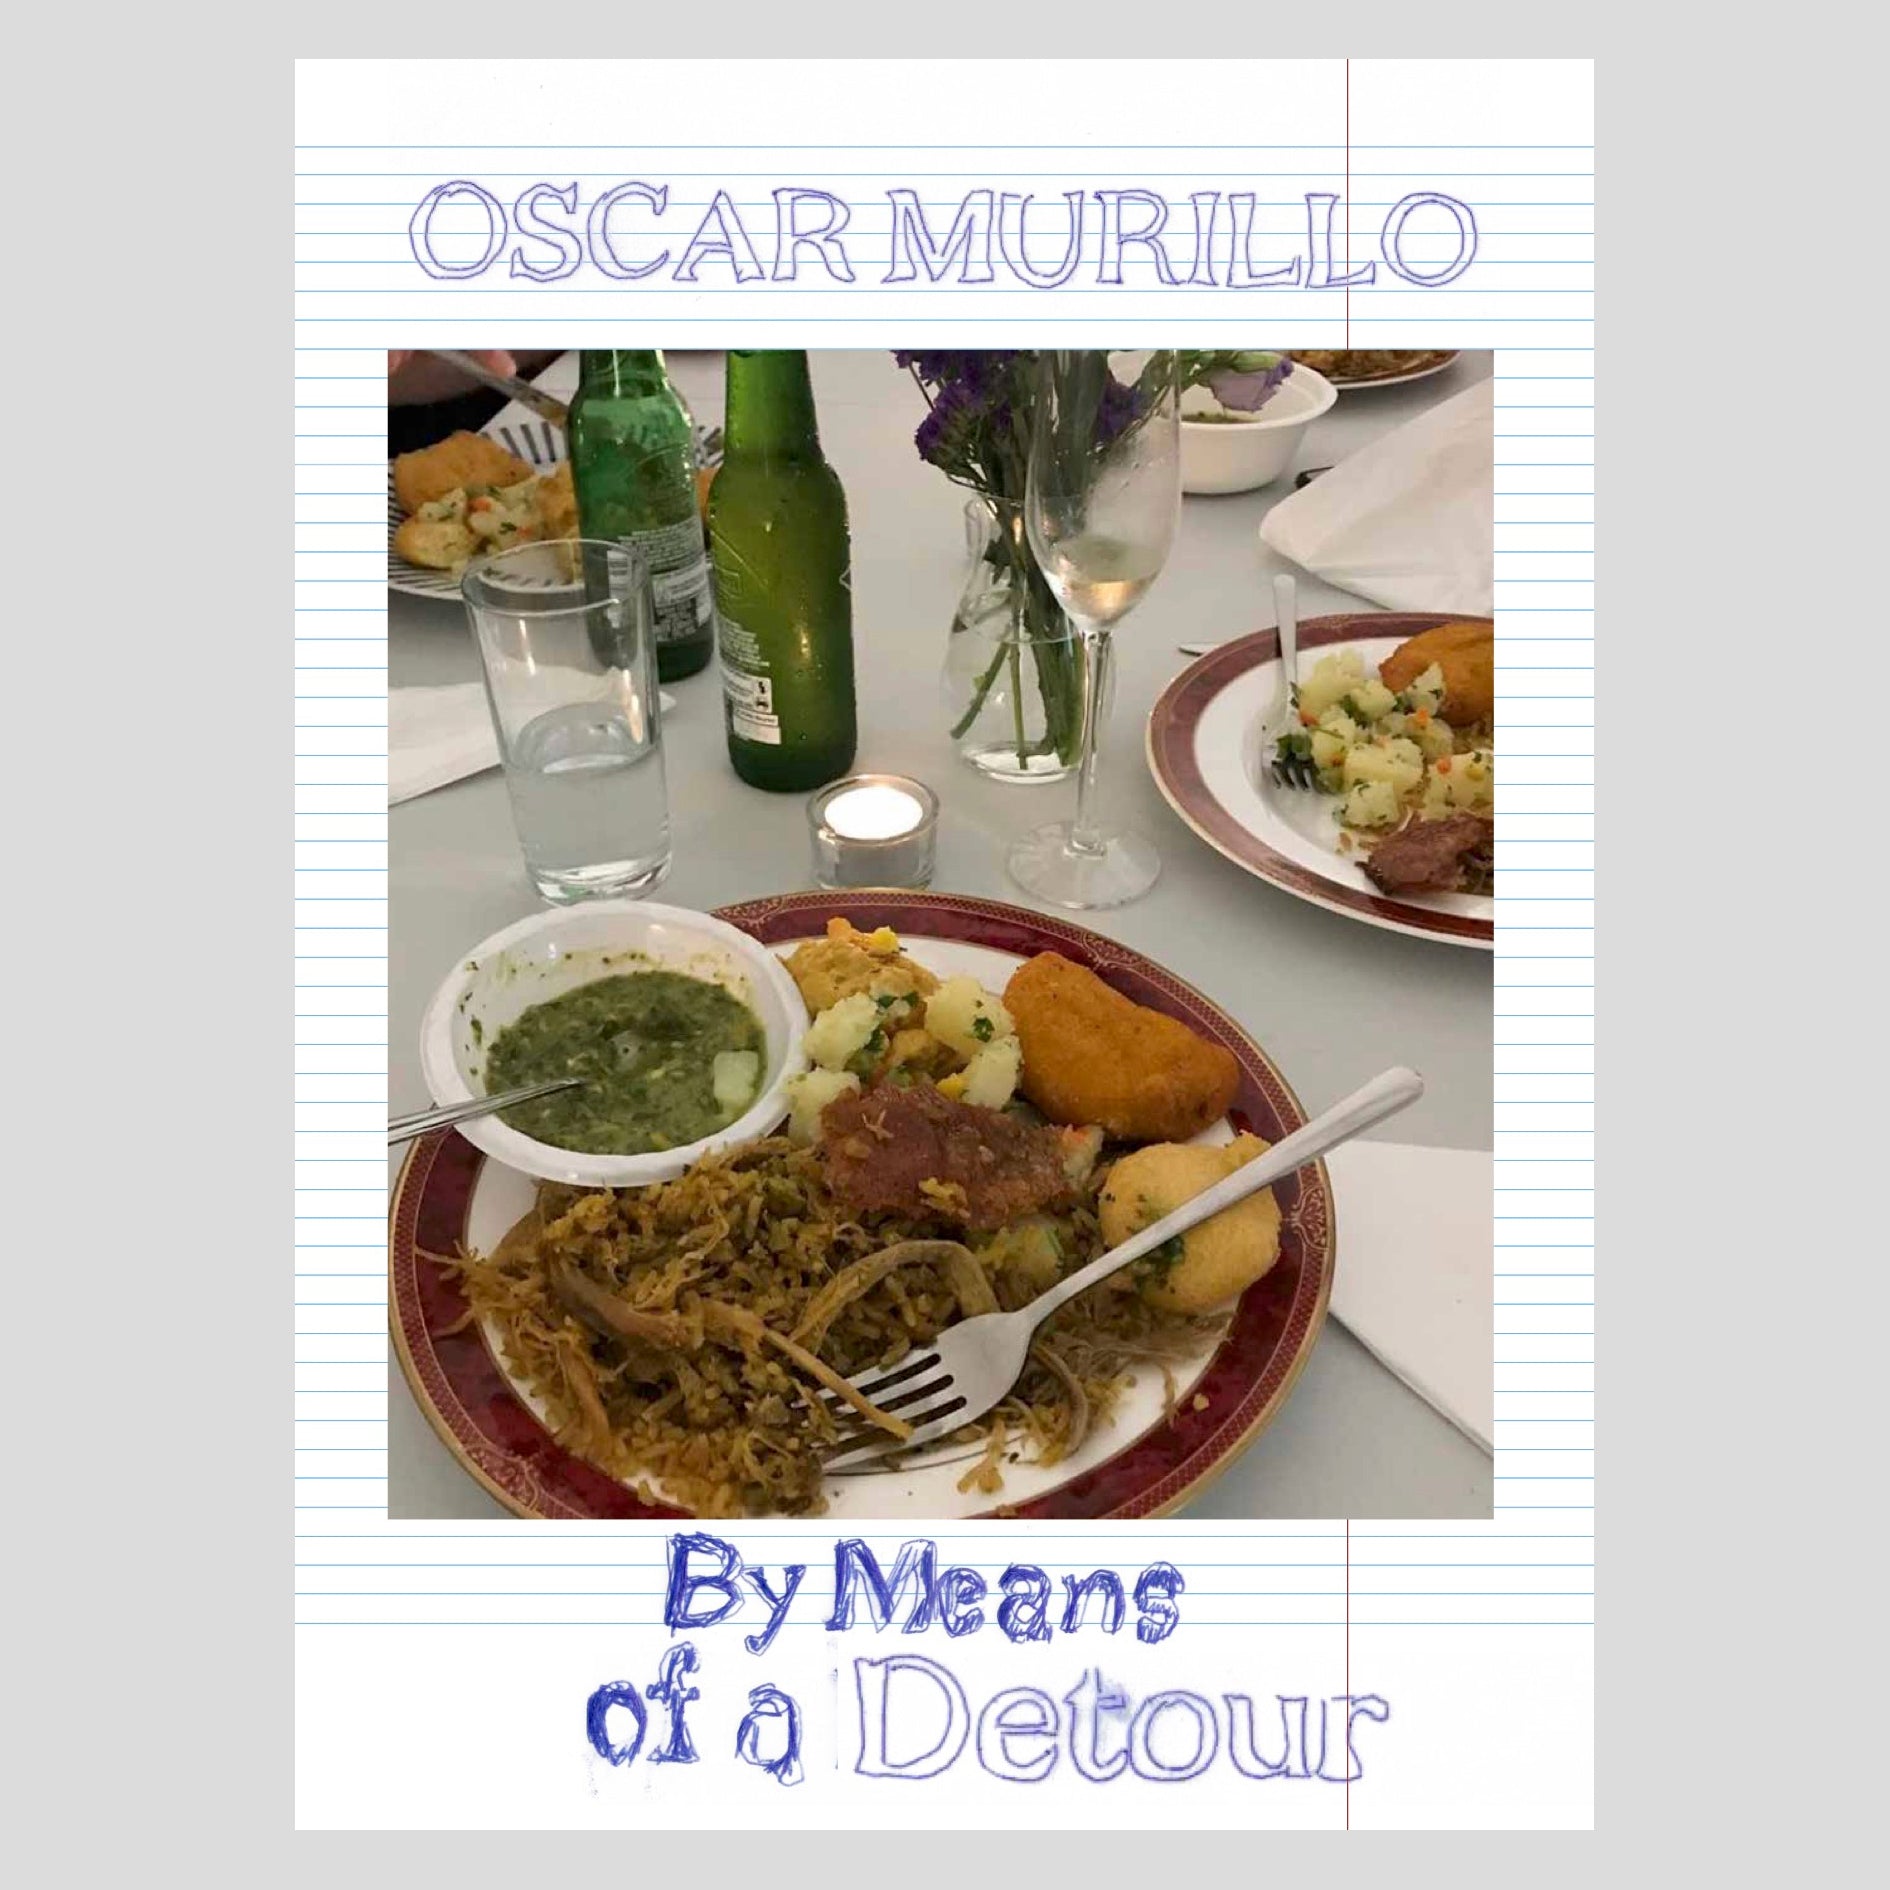 Kettles Yard Oscar Murillo, By Means of a Detour 1